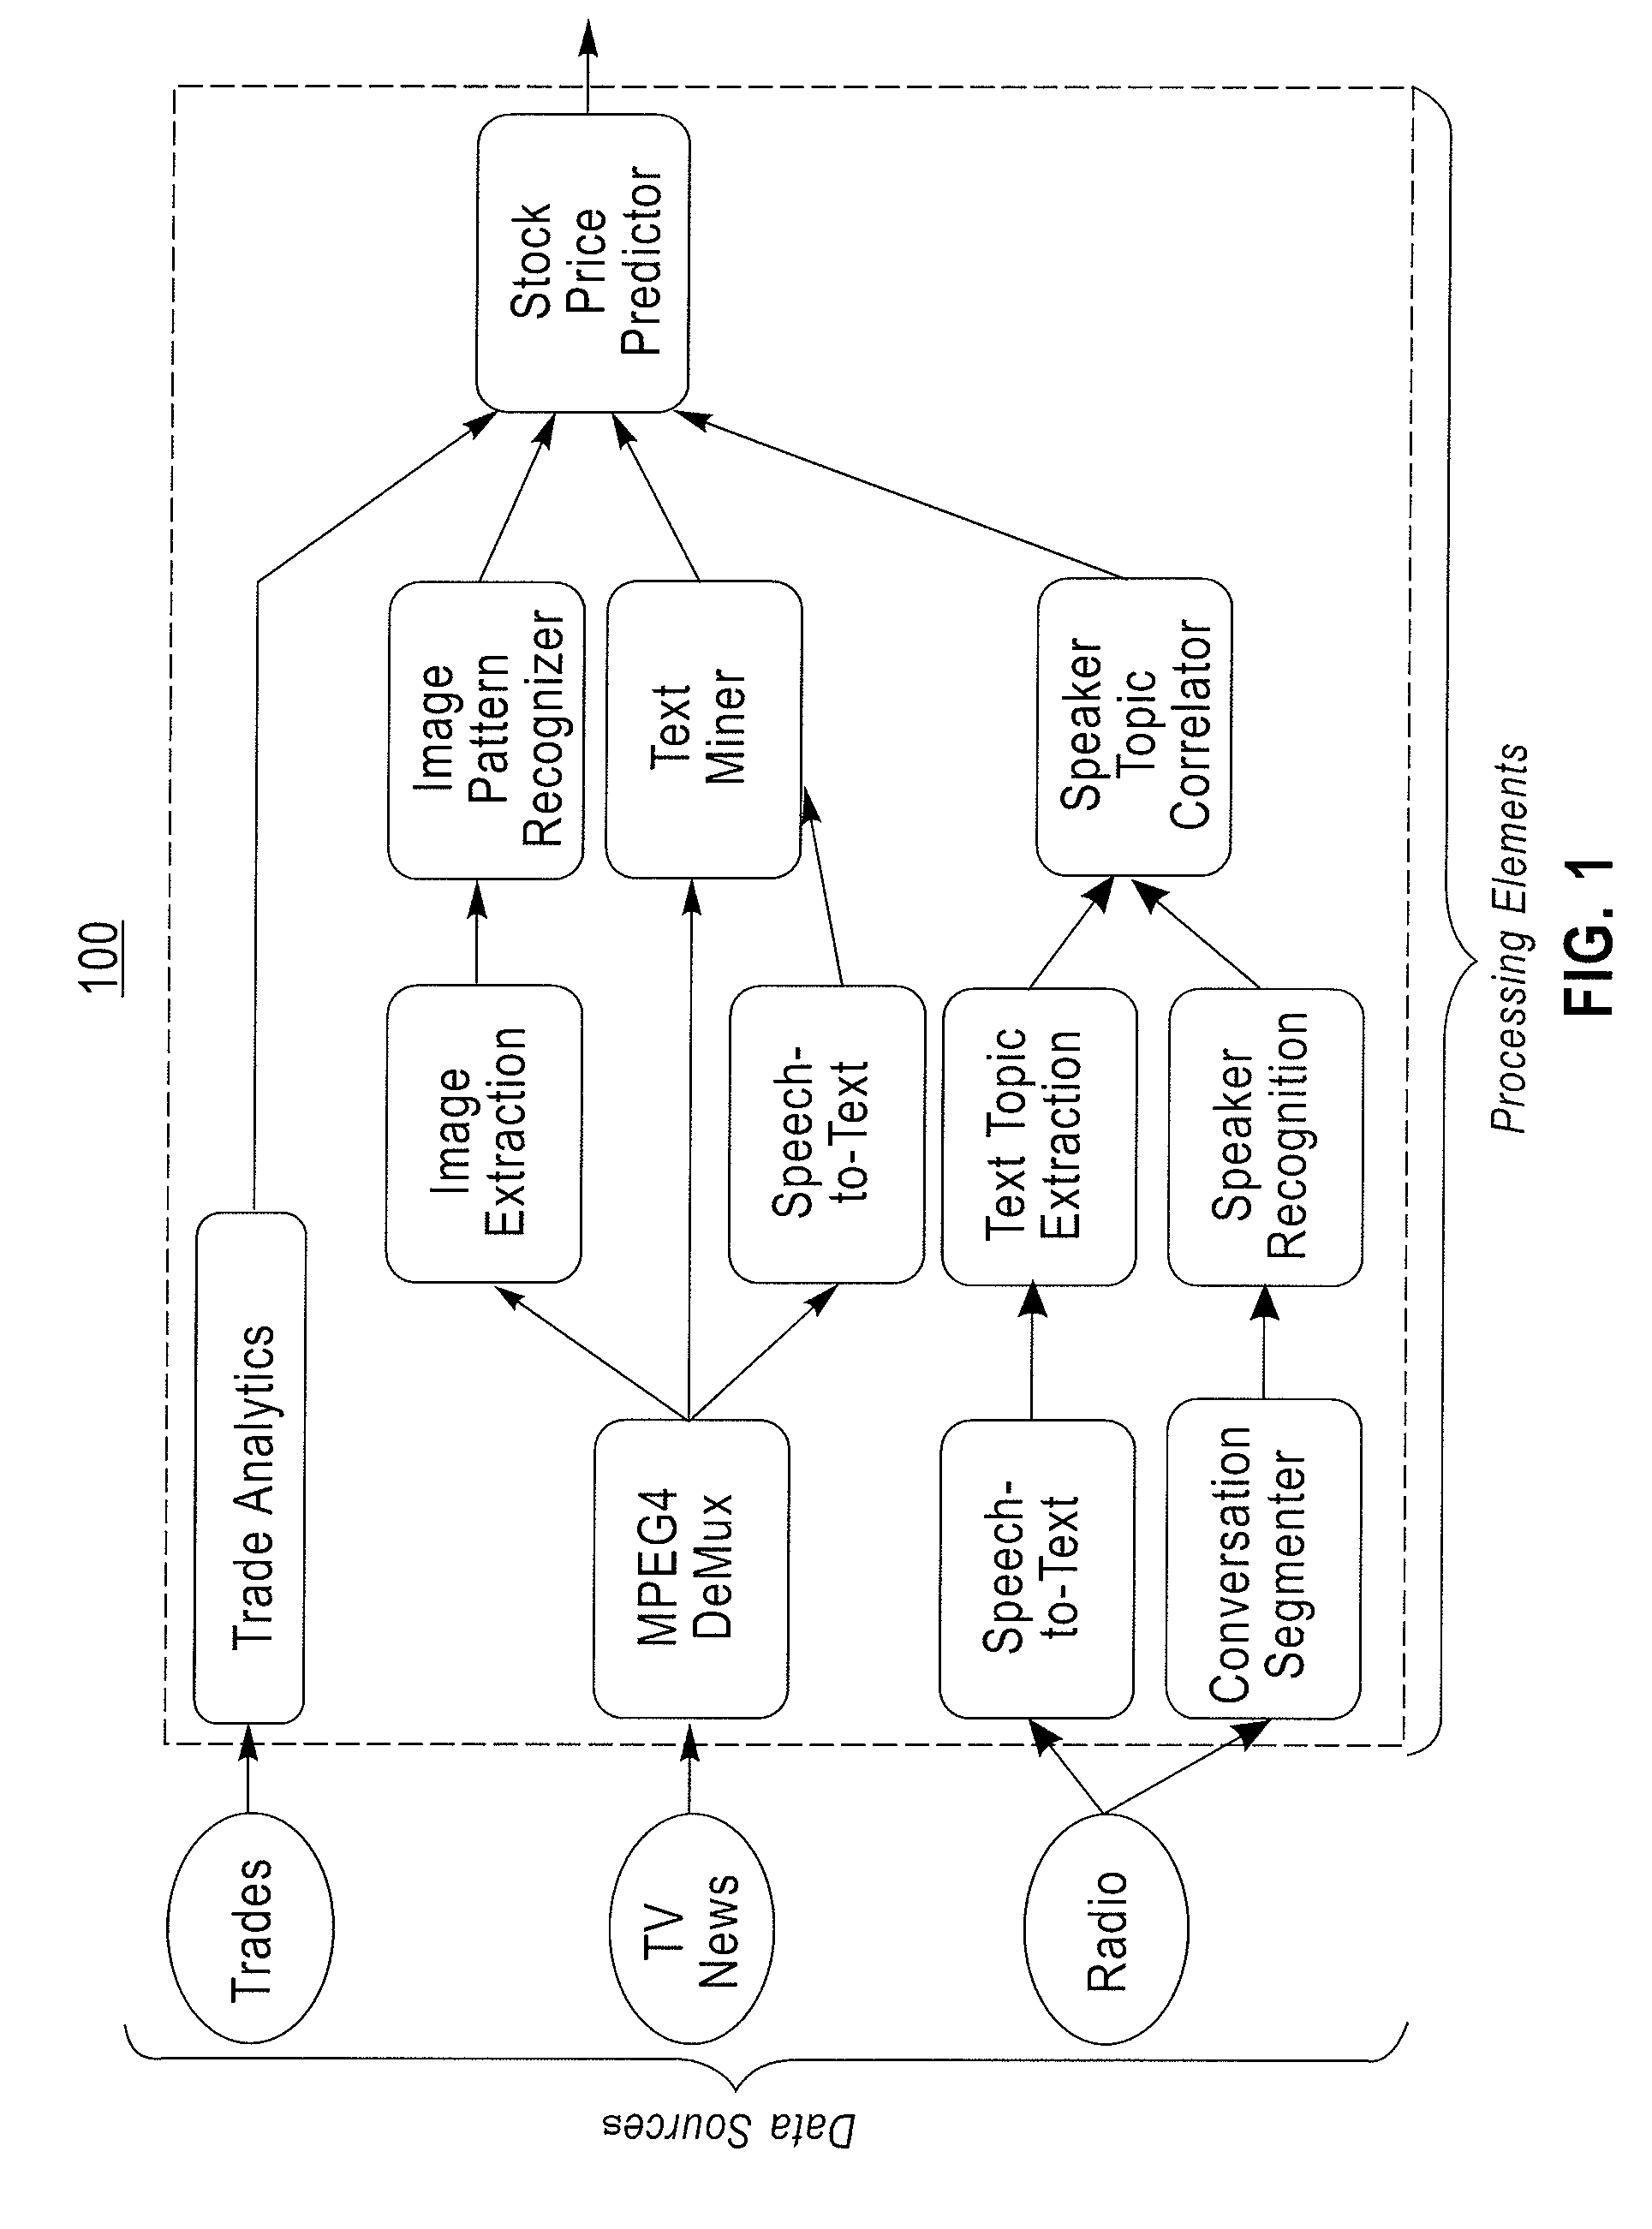 Method for declarative semantic expression of user intent to enable goal-driven stream processing